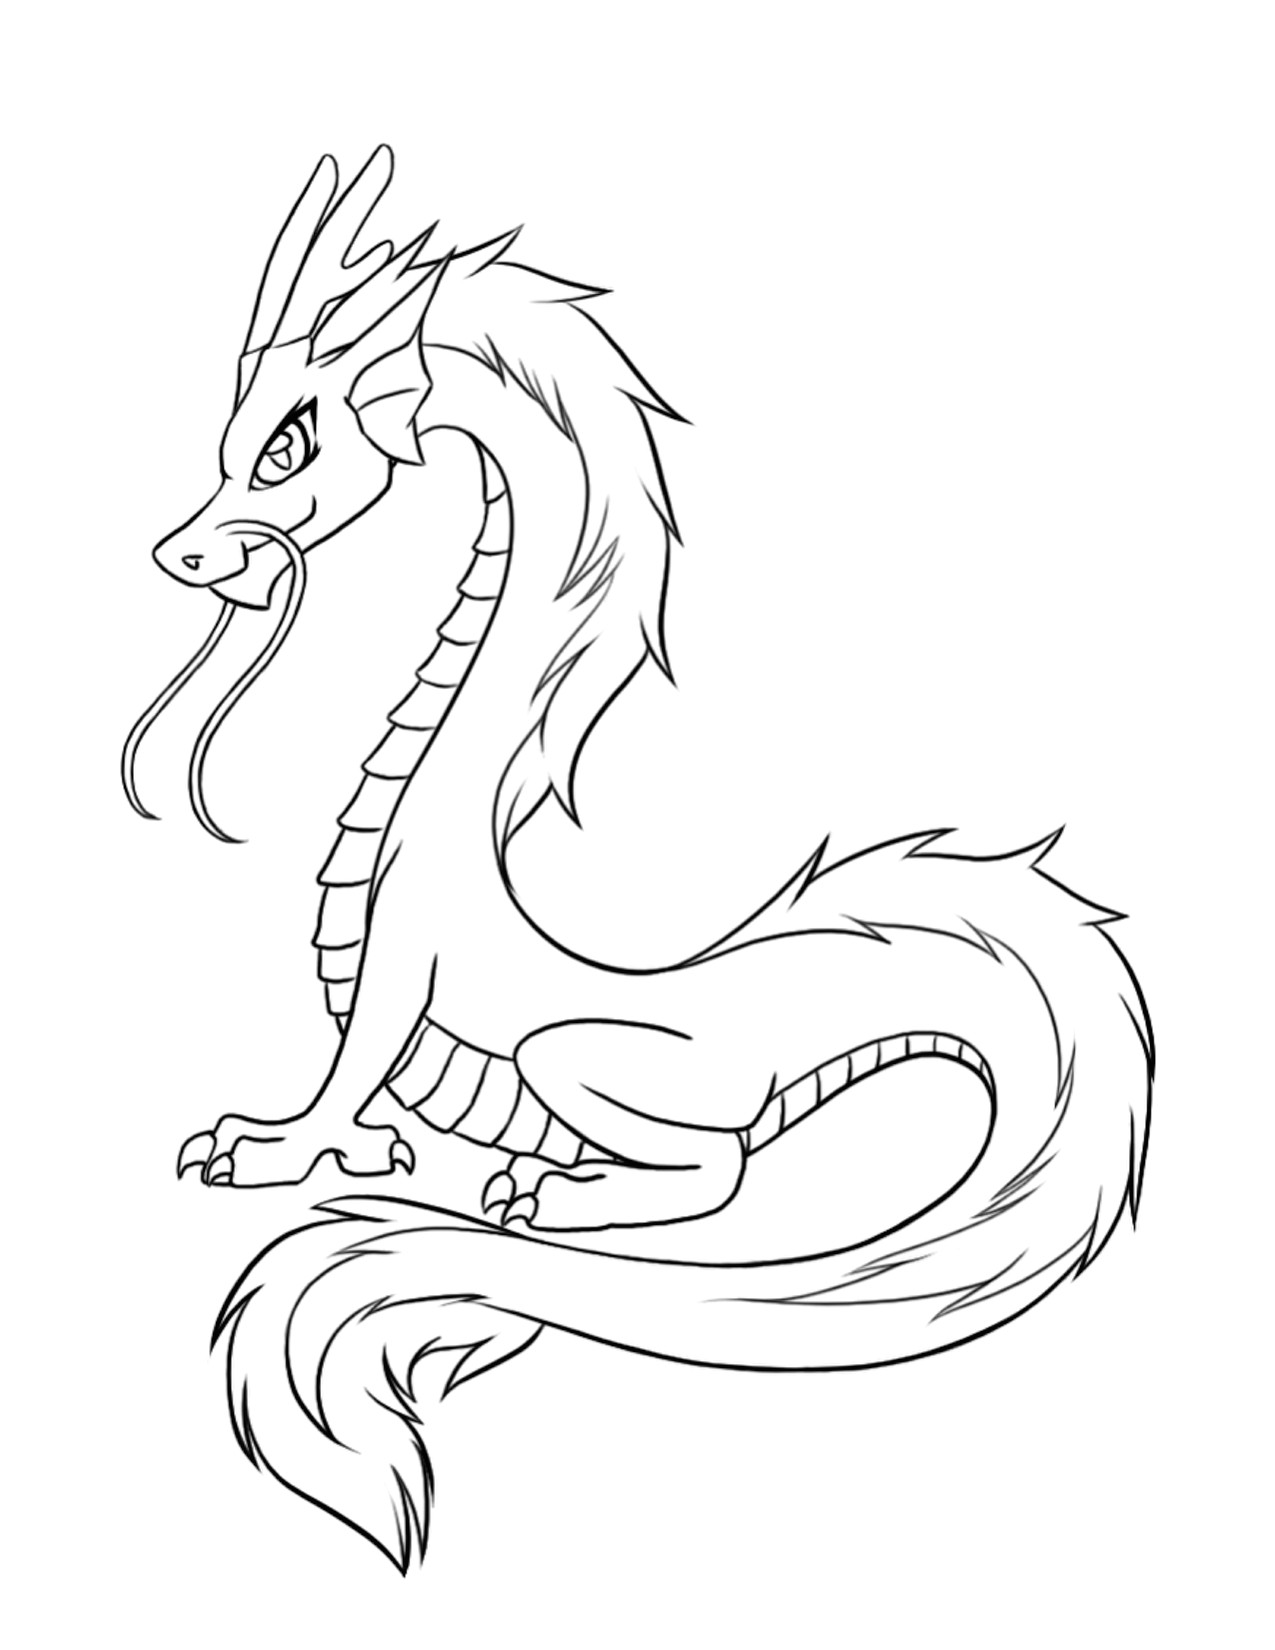 Drawing Realistic Dragons Free Printable Dragon Coloring Pages for Kids Dragon Sketch